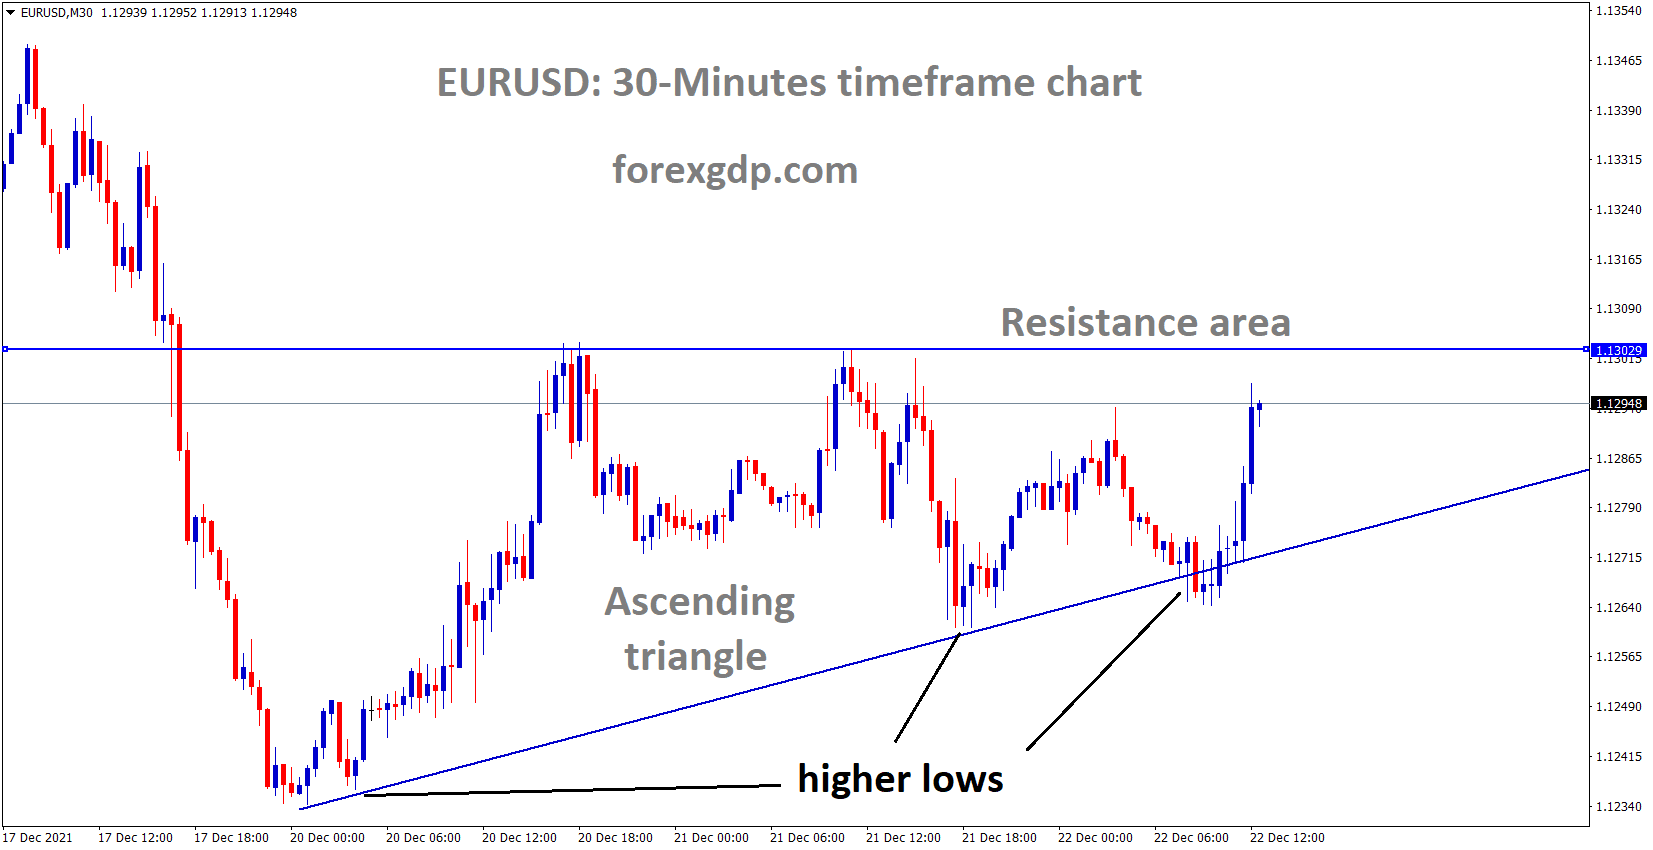 EURUSD is moving in an ascending triangle pattern and the market reached near the resistance area of the pattern.